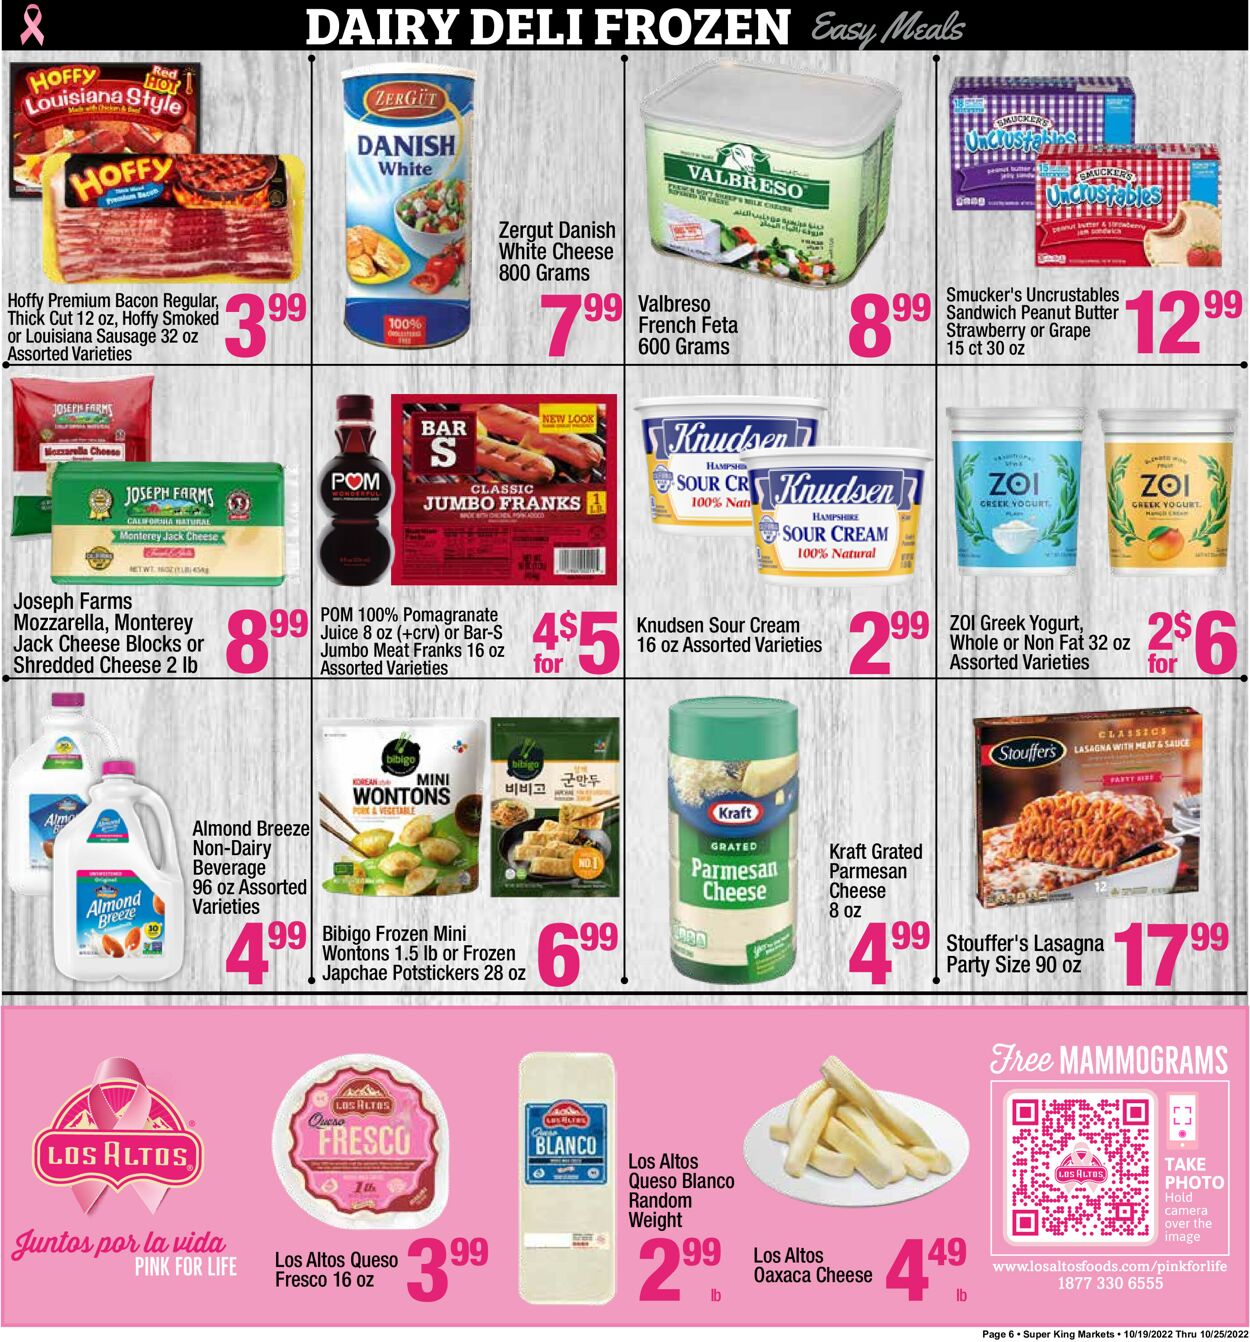 Catalogue Super King Market from 10/19/2002